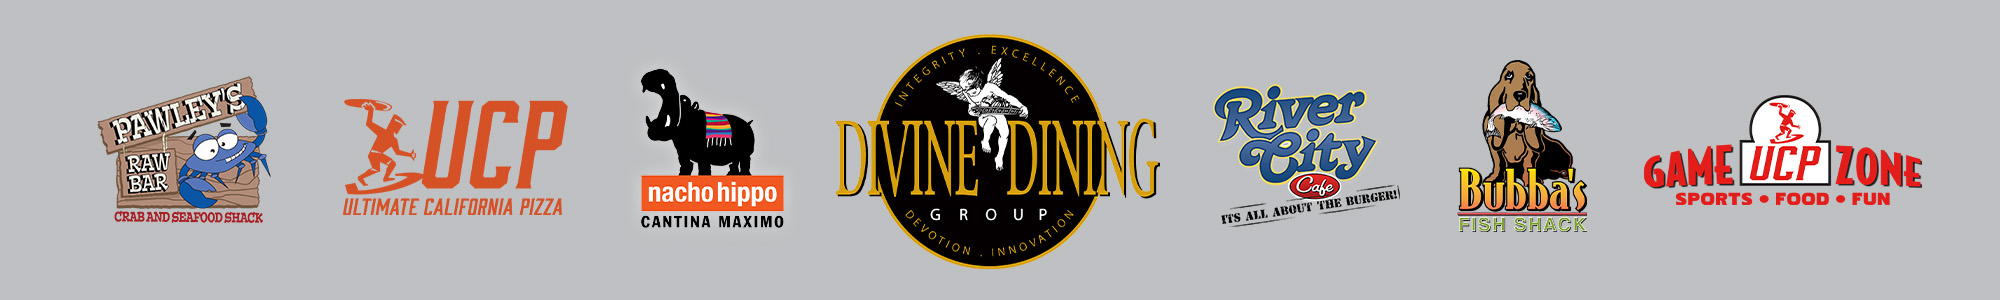 Divine Dining Group